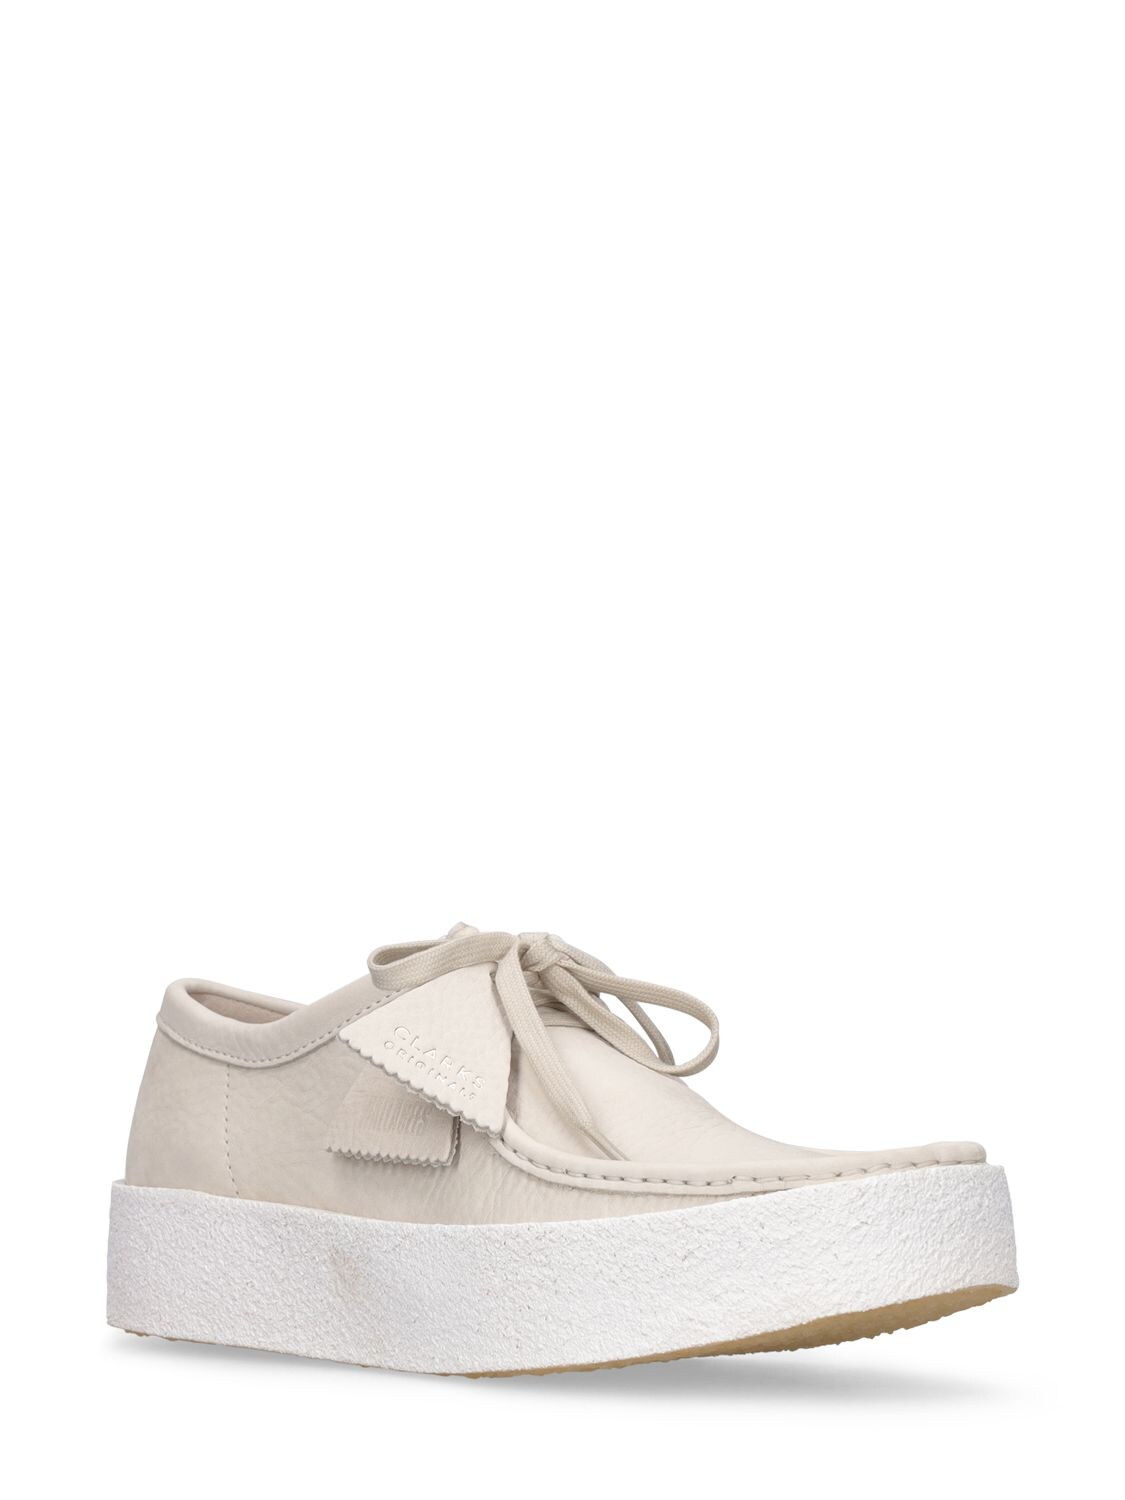 Shop Clarks Originals Wallabe Cup Lace-up Shoes In White